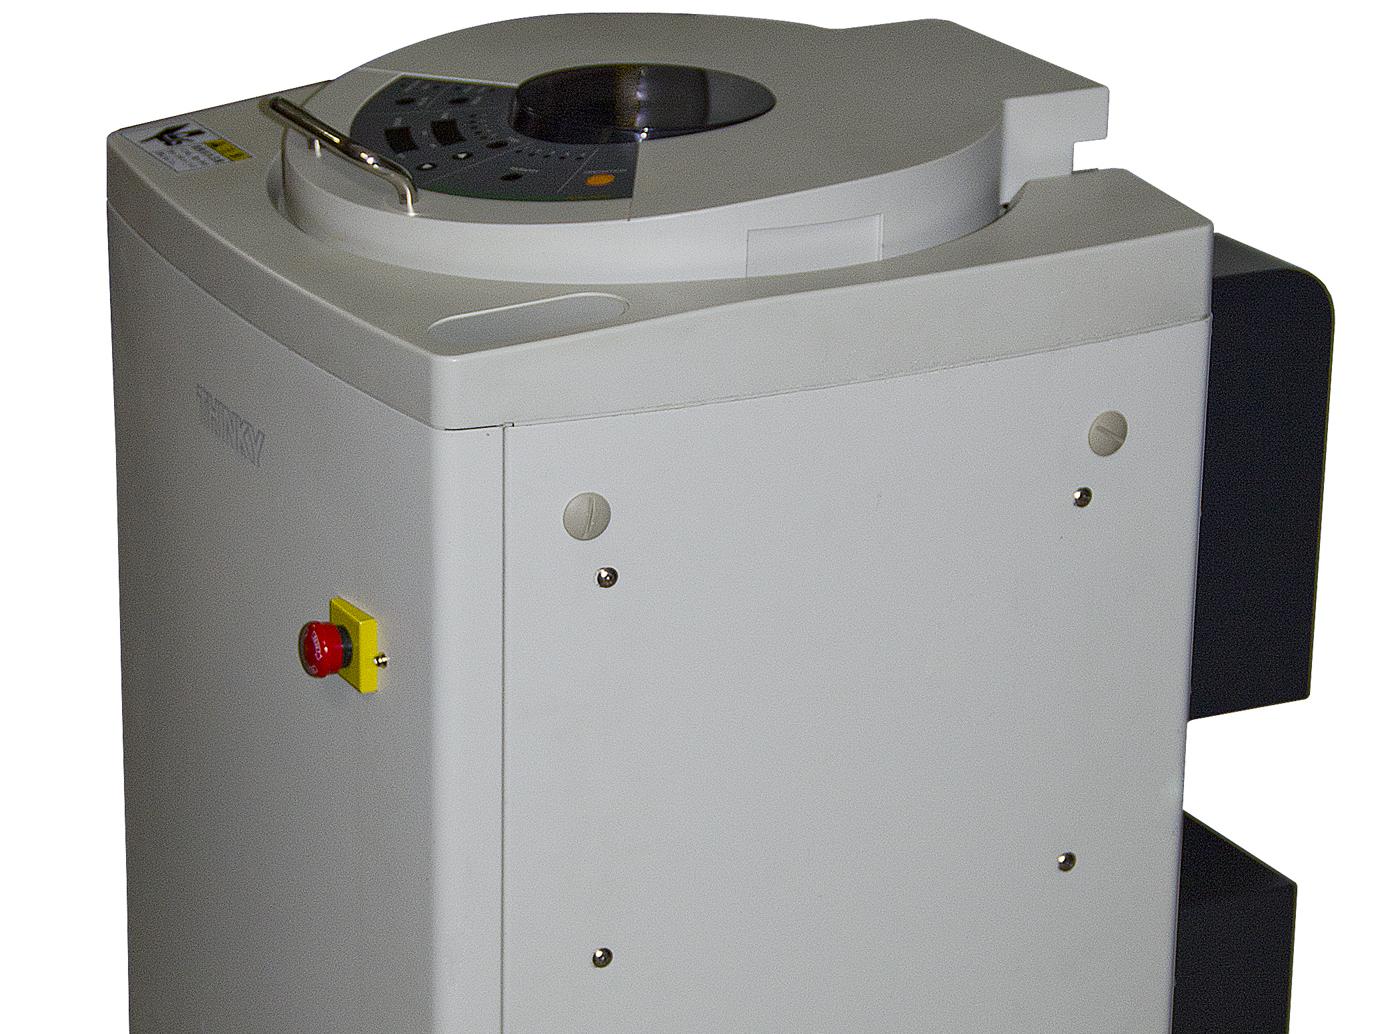 Thinky mixer provides rapid one-step dispersal/degassing